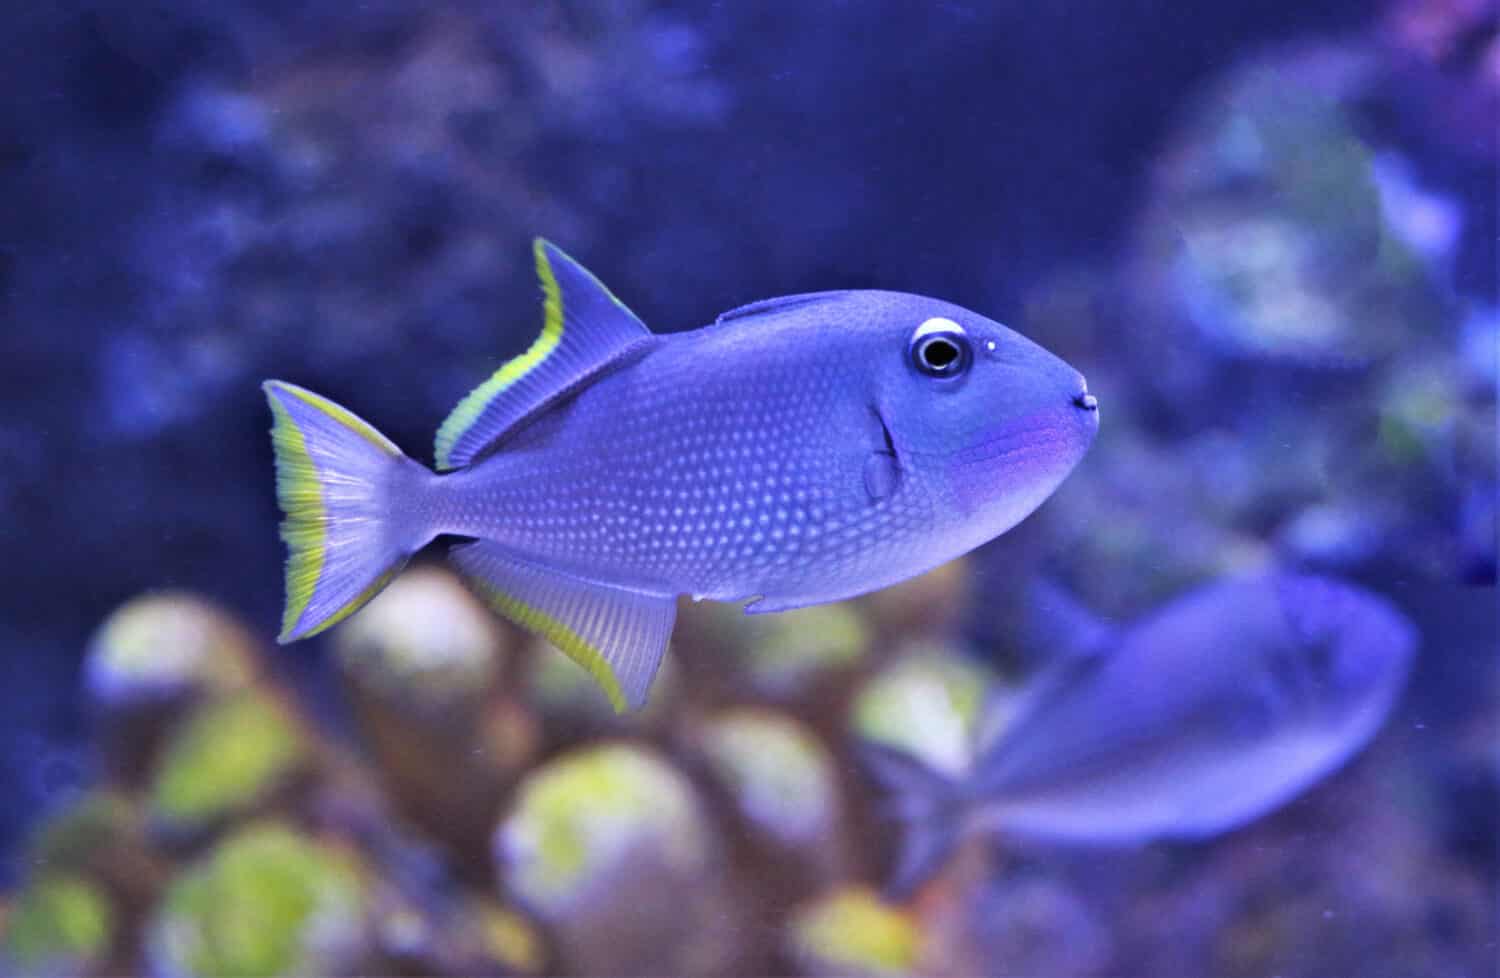 The gilded triggerfish,blue-throated triggerfish (Xanthichthys auromarginatus) is a spotted gray triggerfish, belonging to the family Balistidae. It is swimming in marine aquarium.